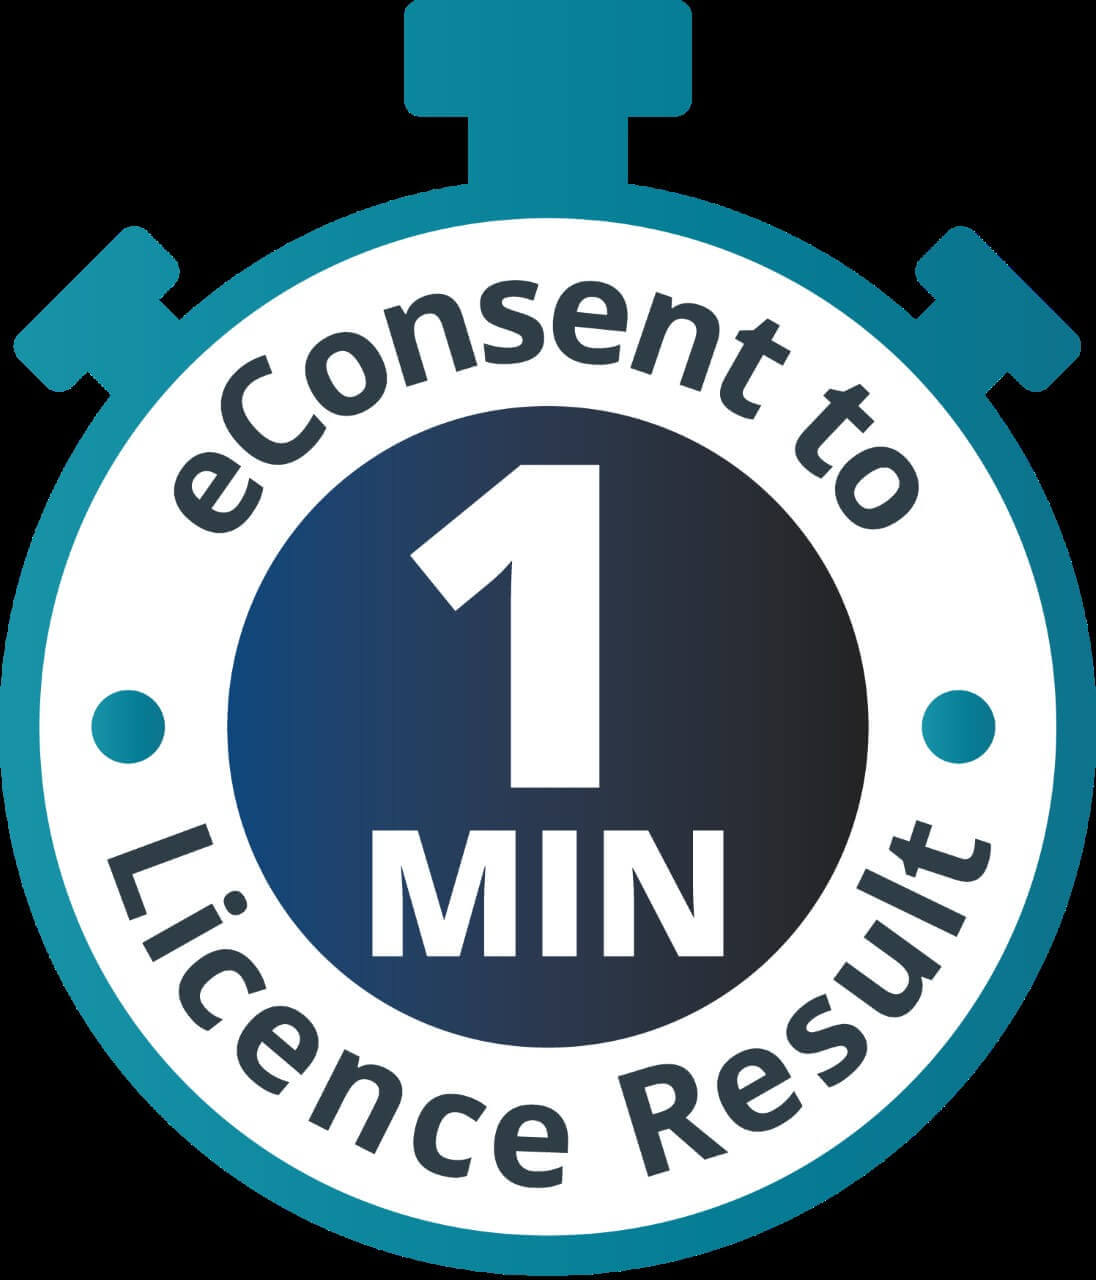 econsent to Licence Check result in 1 minute logo